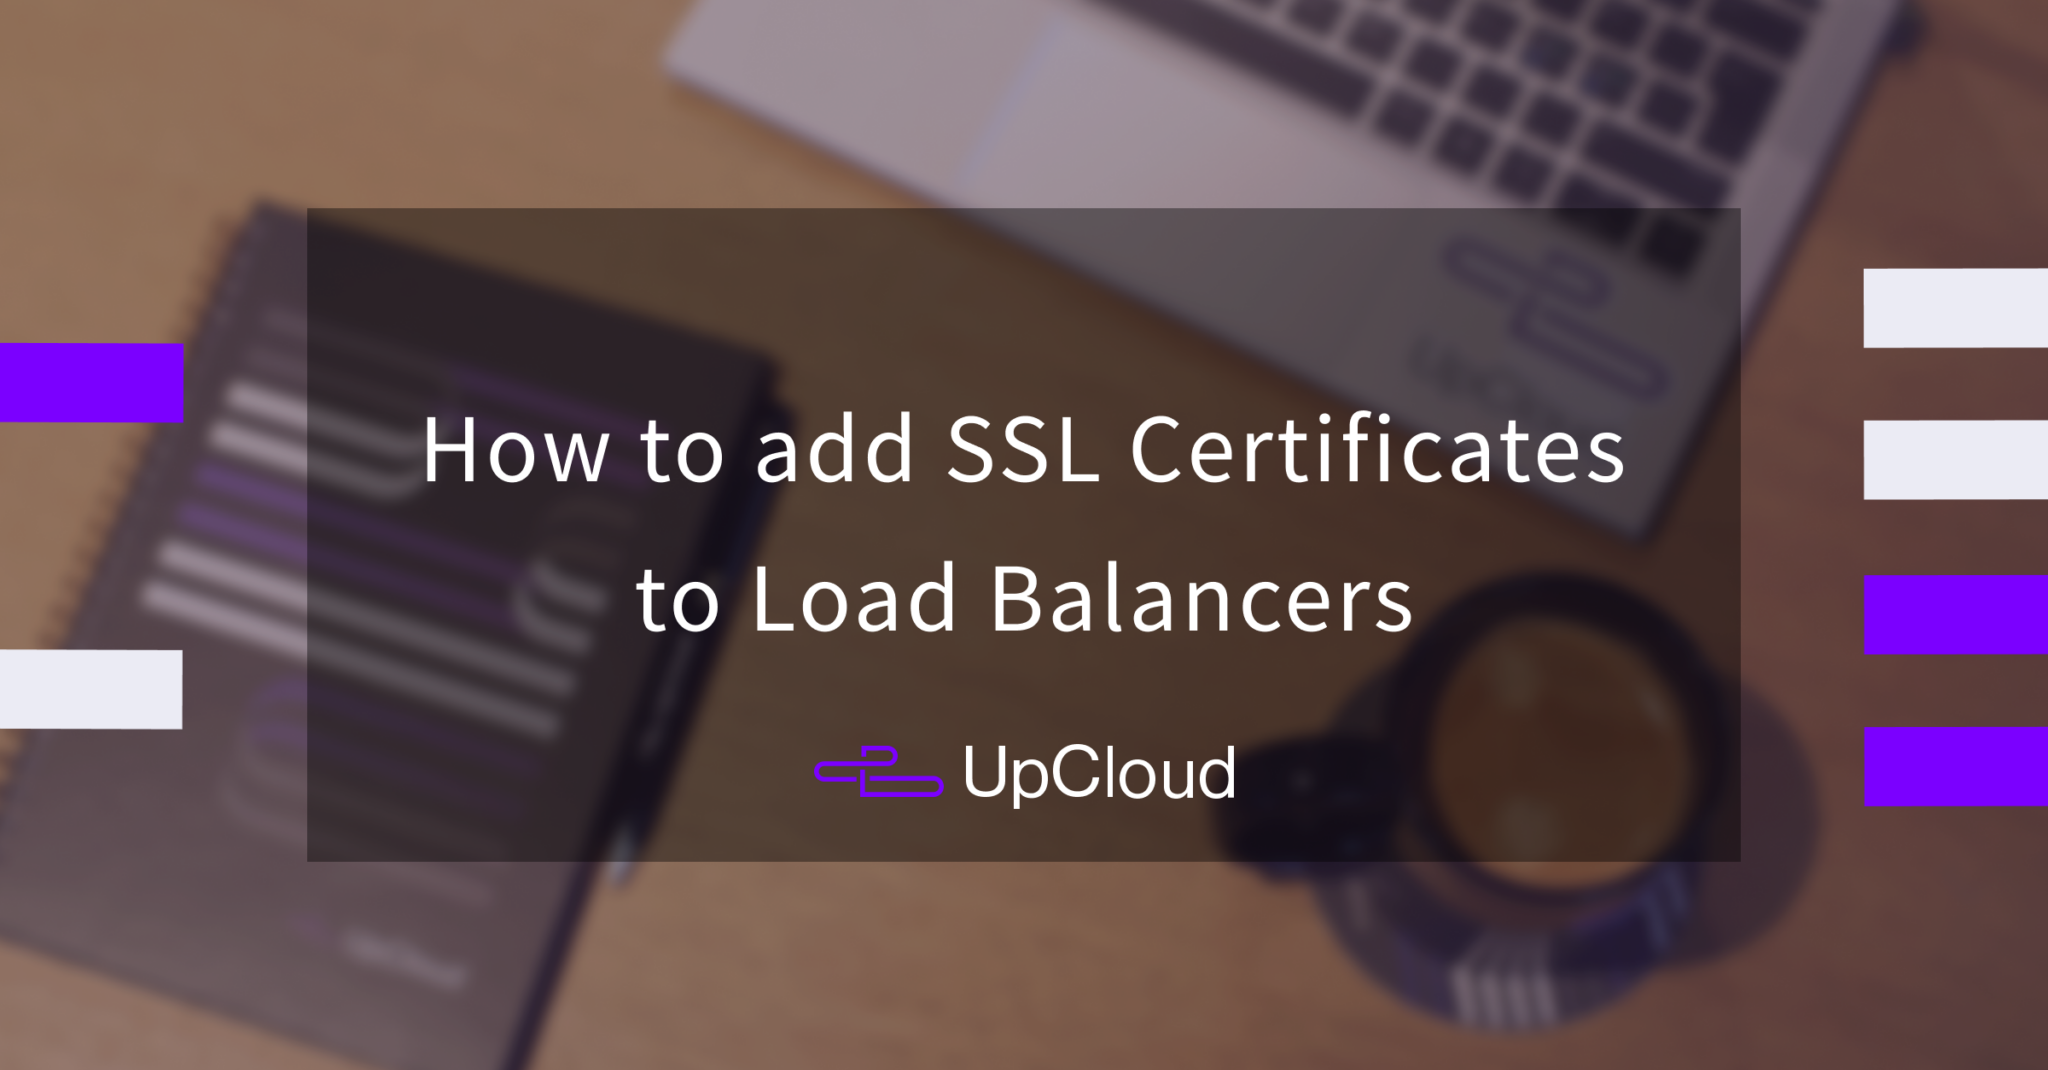 How to add SSL Certificates to Load Balancers